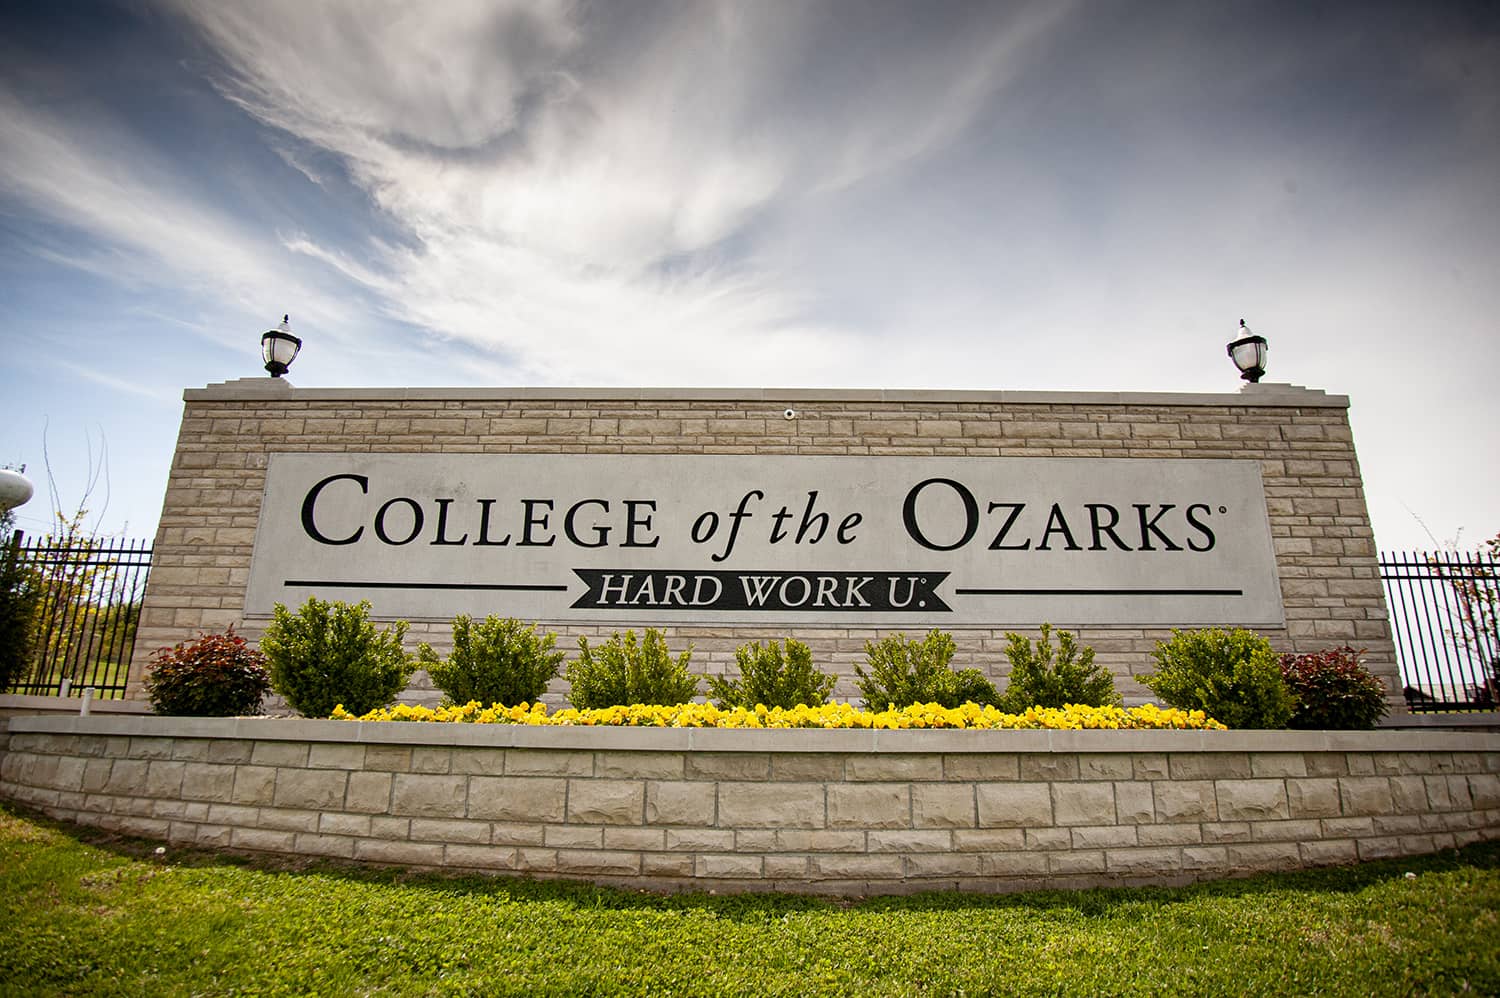 u-s-court-of-appeals-grants-request-in-college-of-the-ozarks-case-ktts